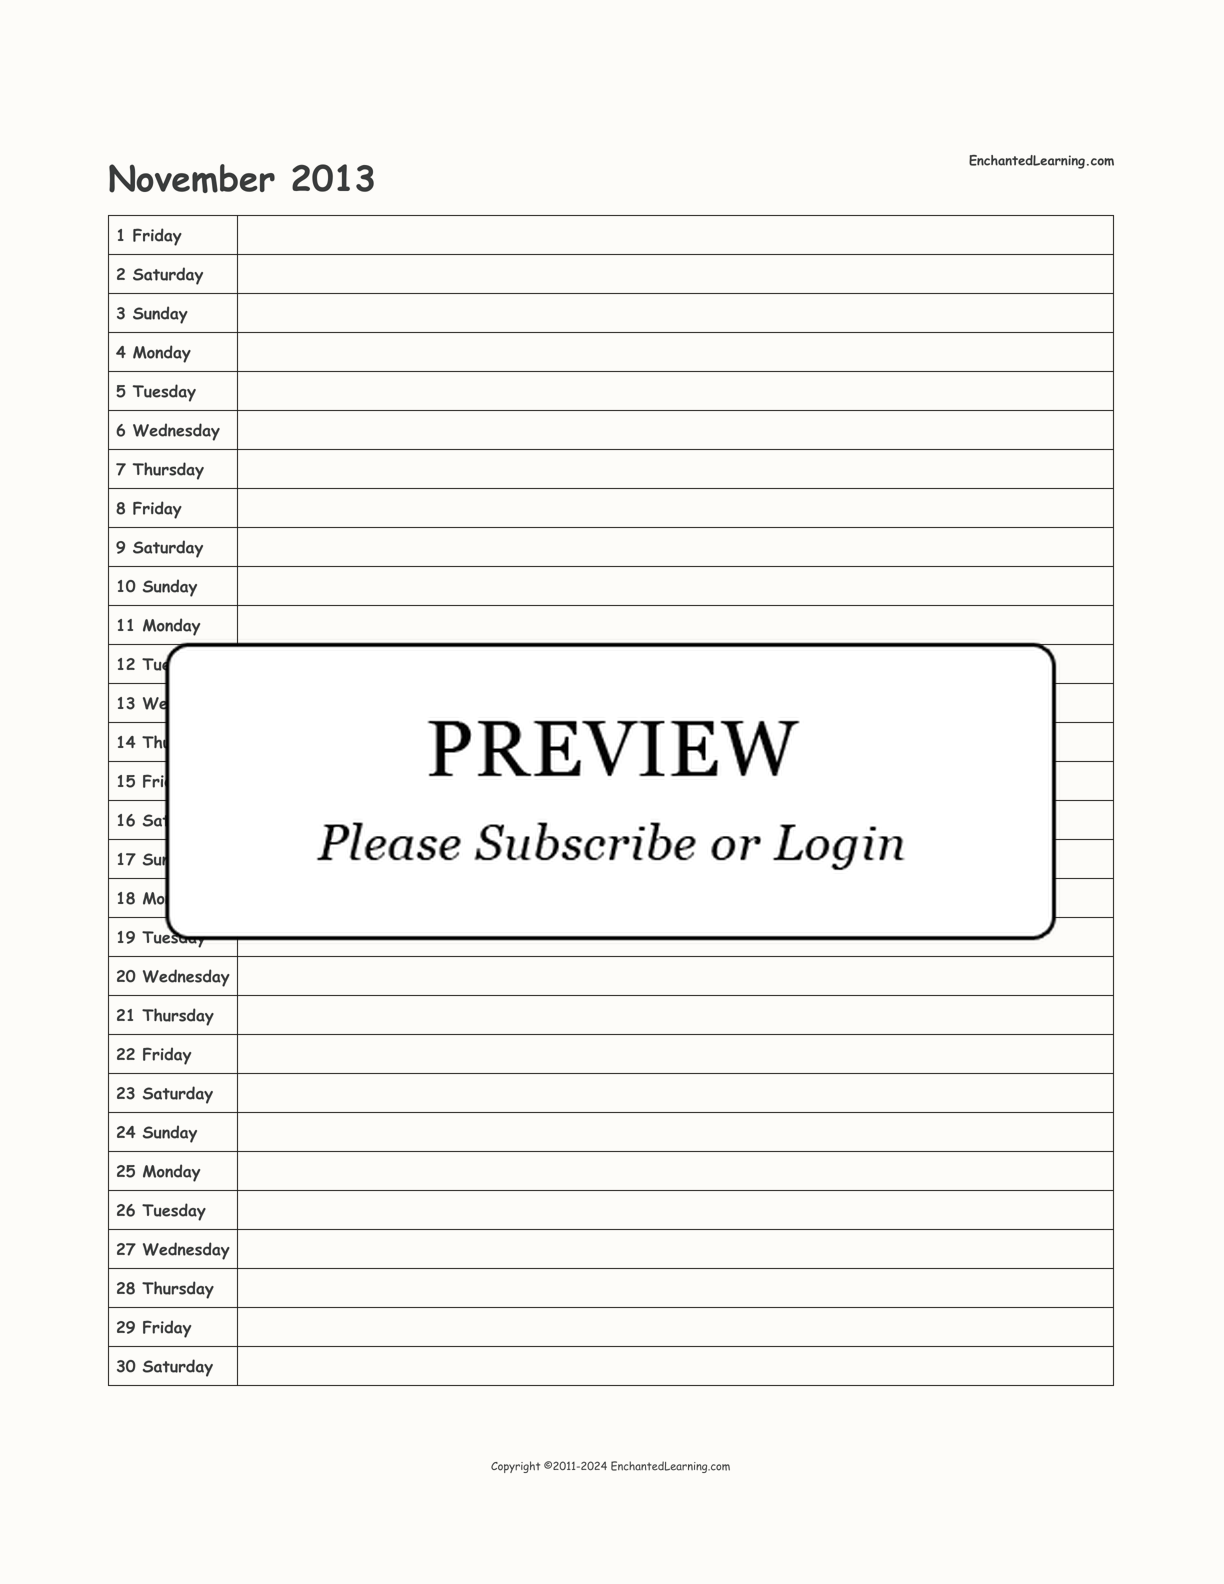 2013 Scheduling Calendar interactive printout page 11